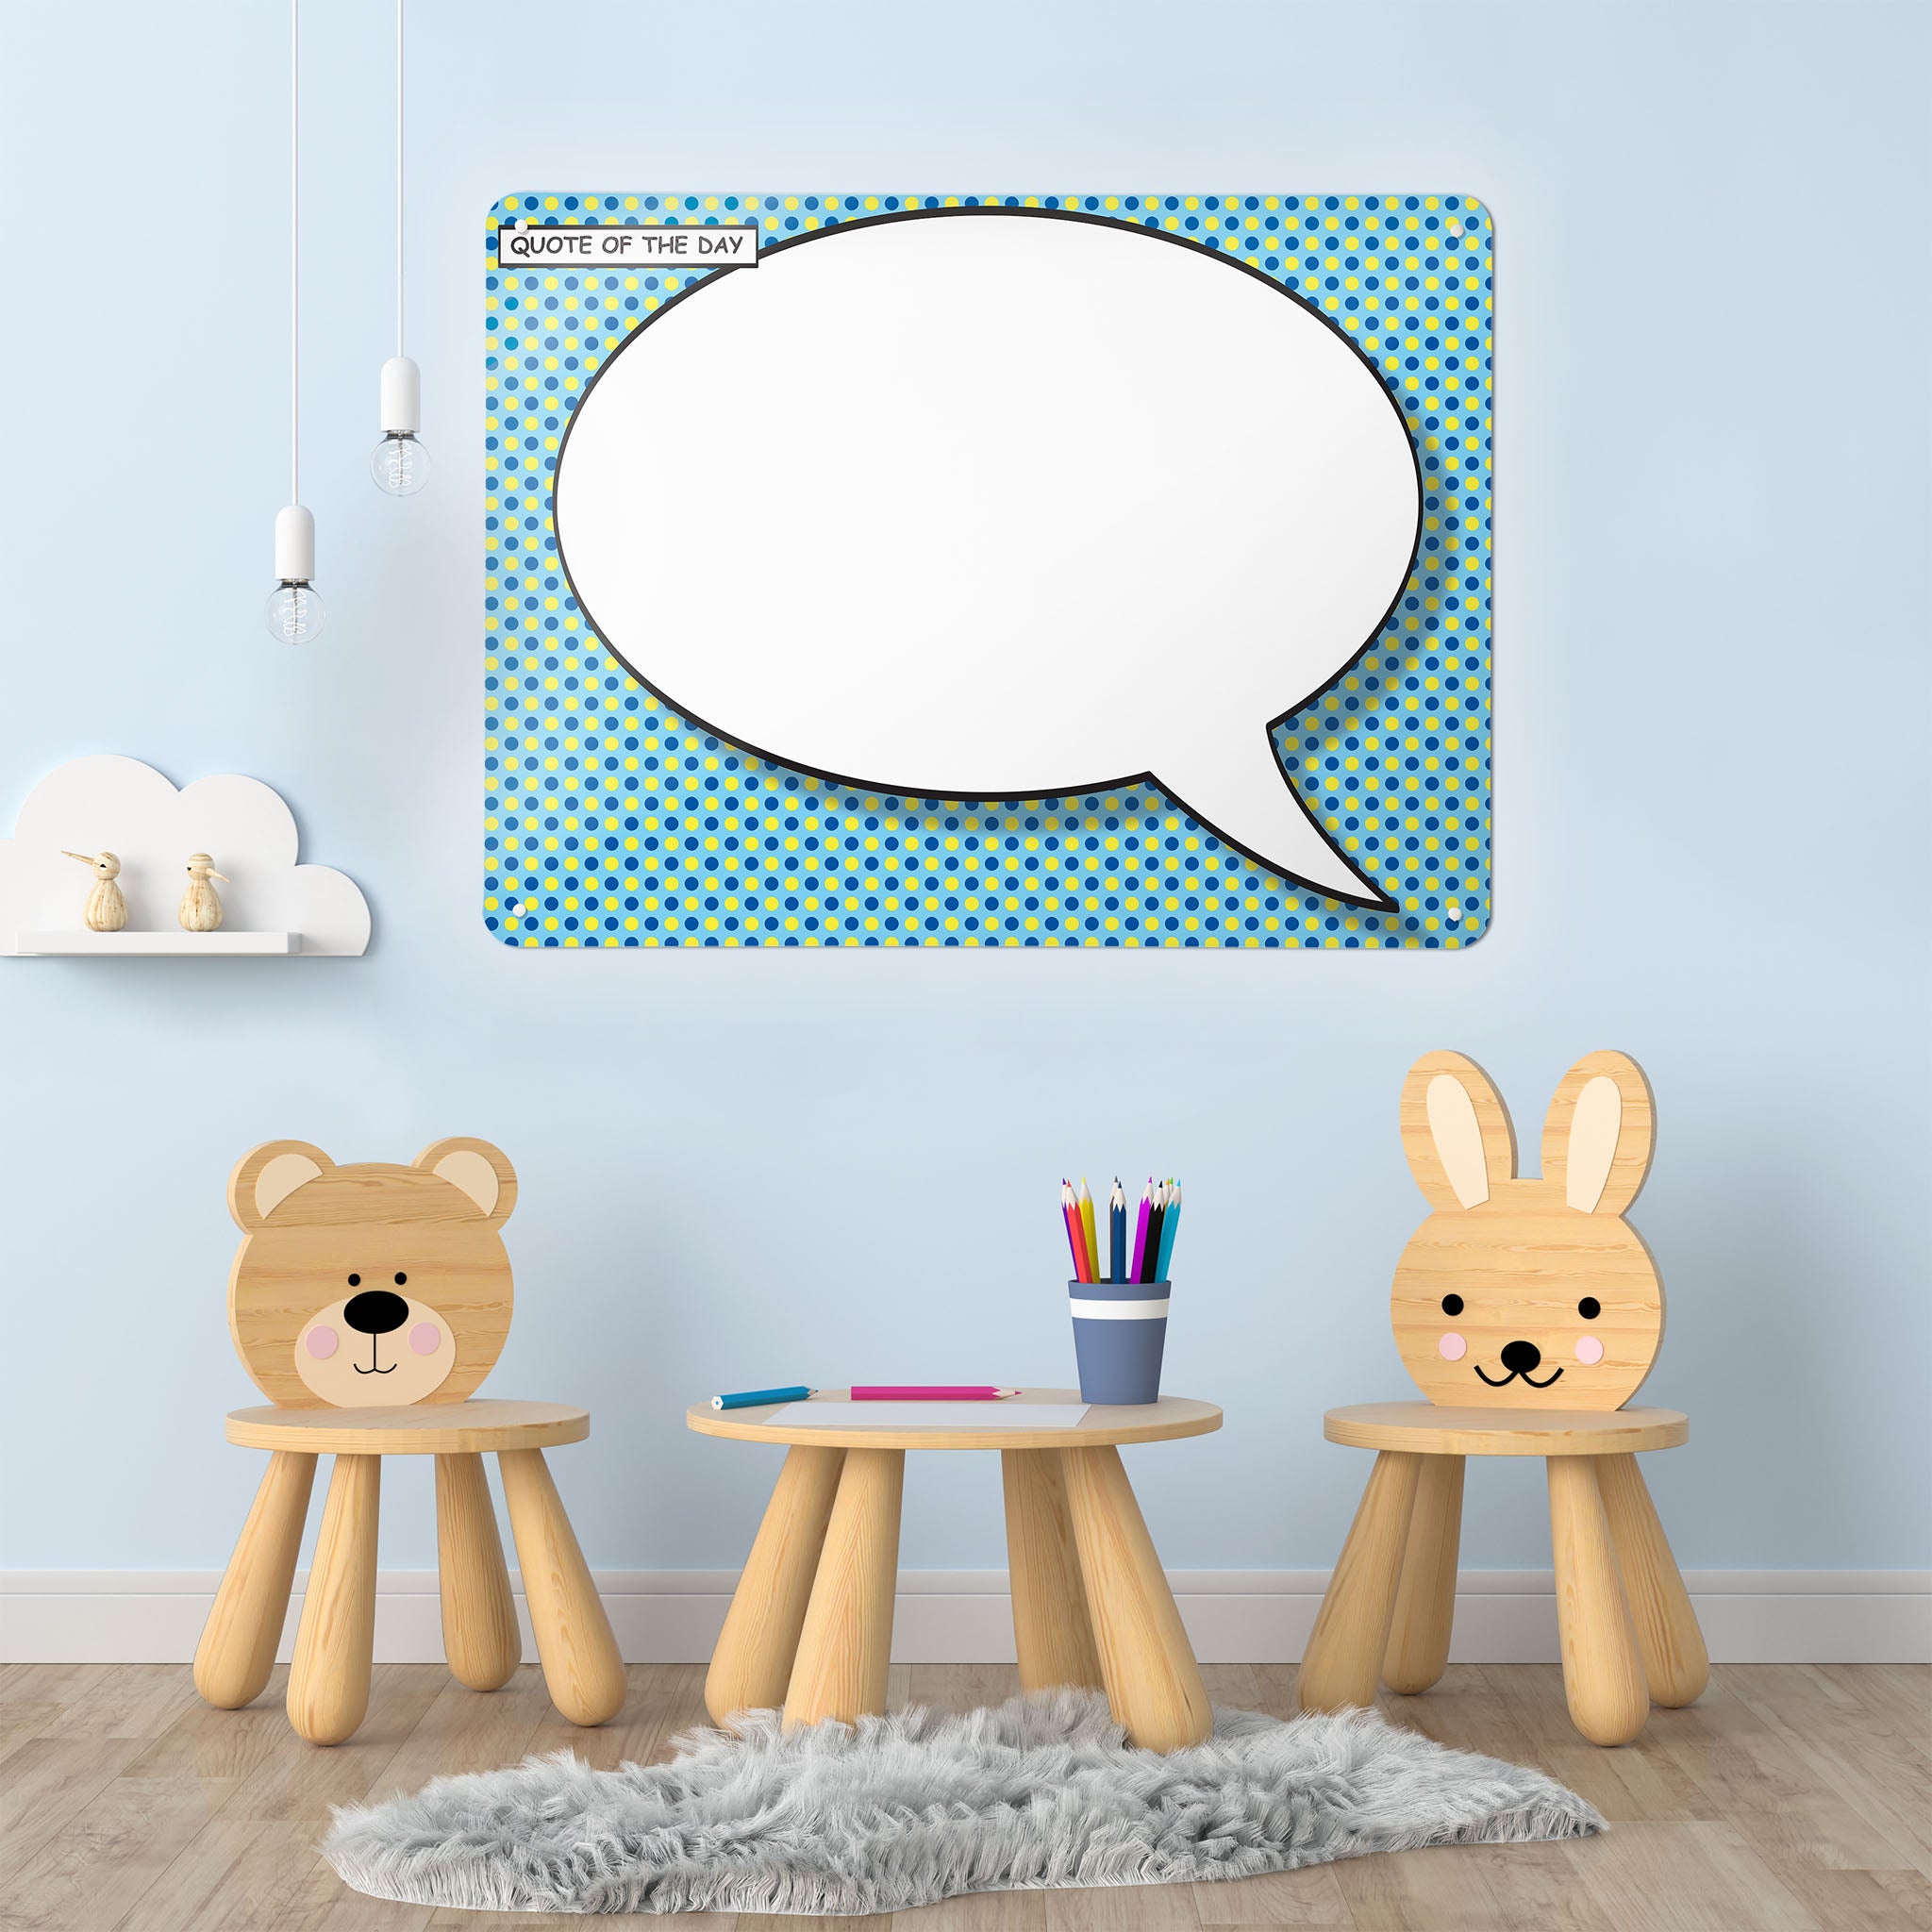 A playroom interior with a magnetic metal wall art panel showing a cartoon speech bubble design